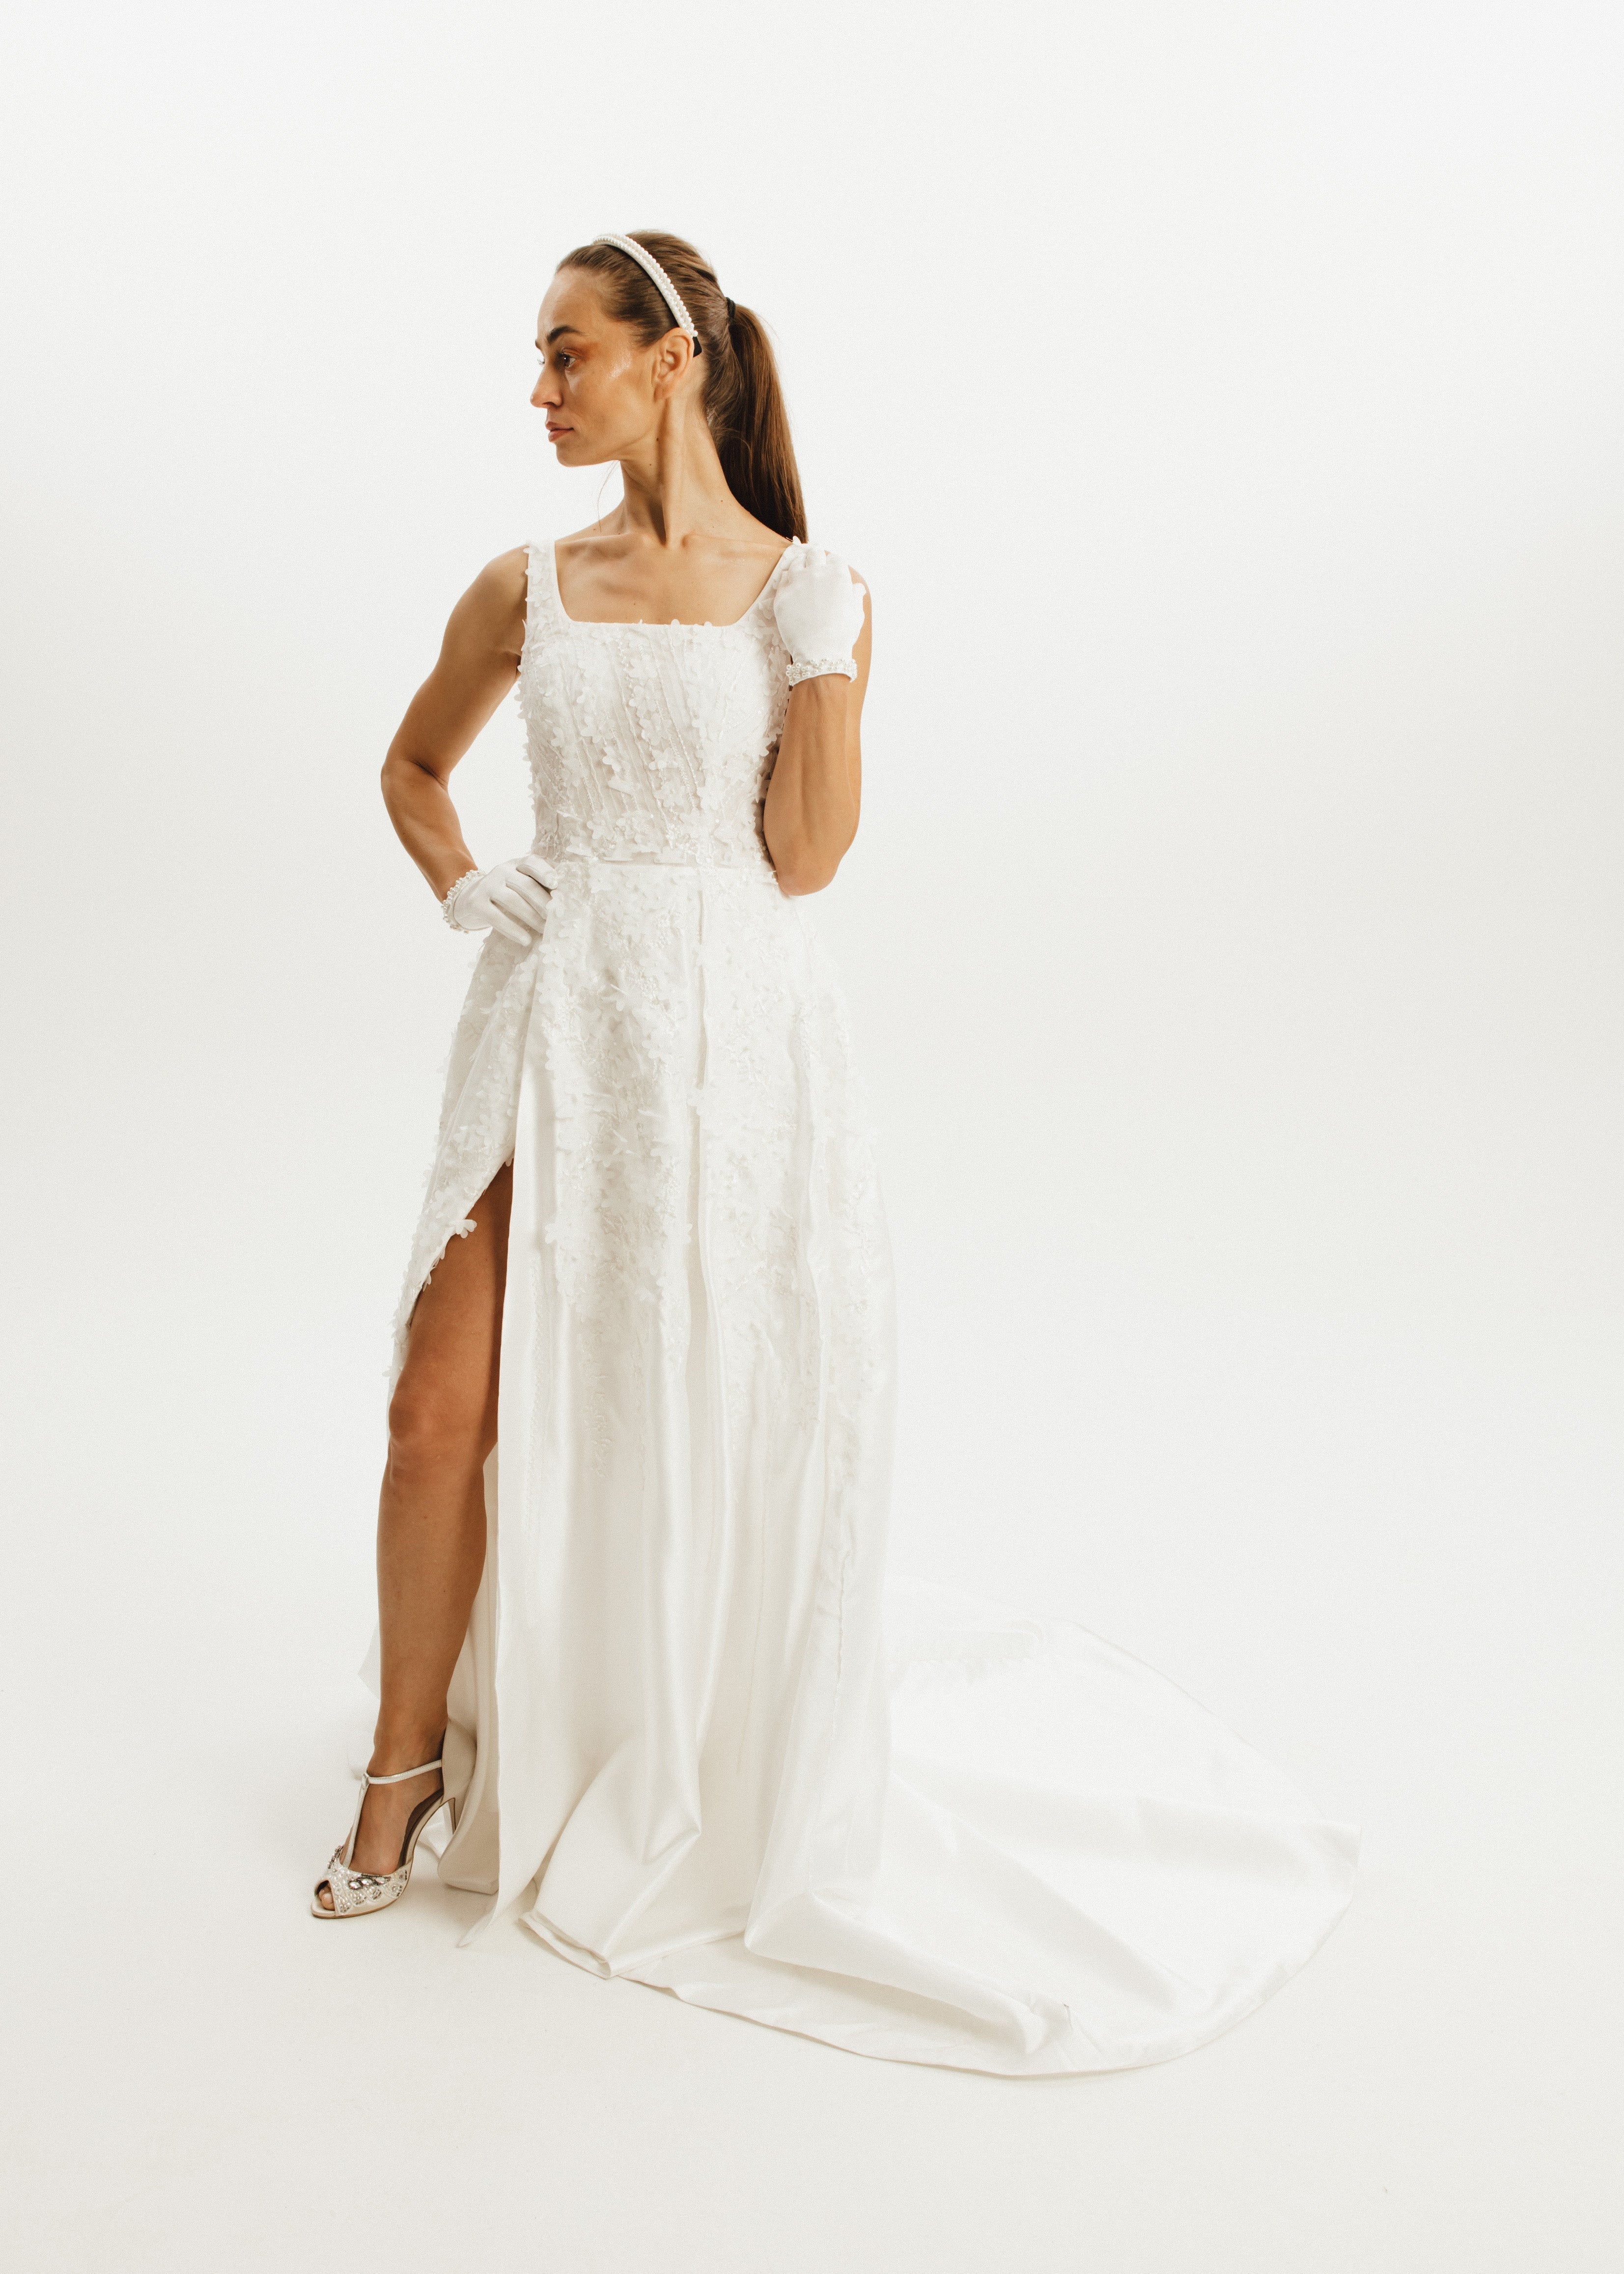 Try At Home - Kate Classic A-line Bridal Gown